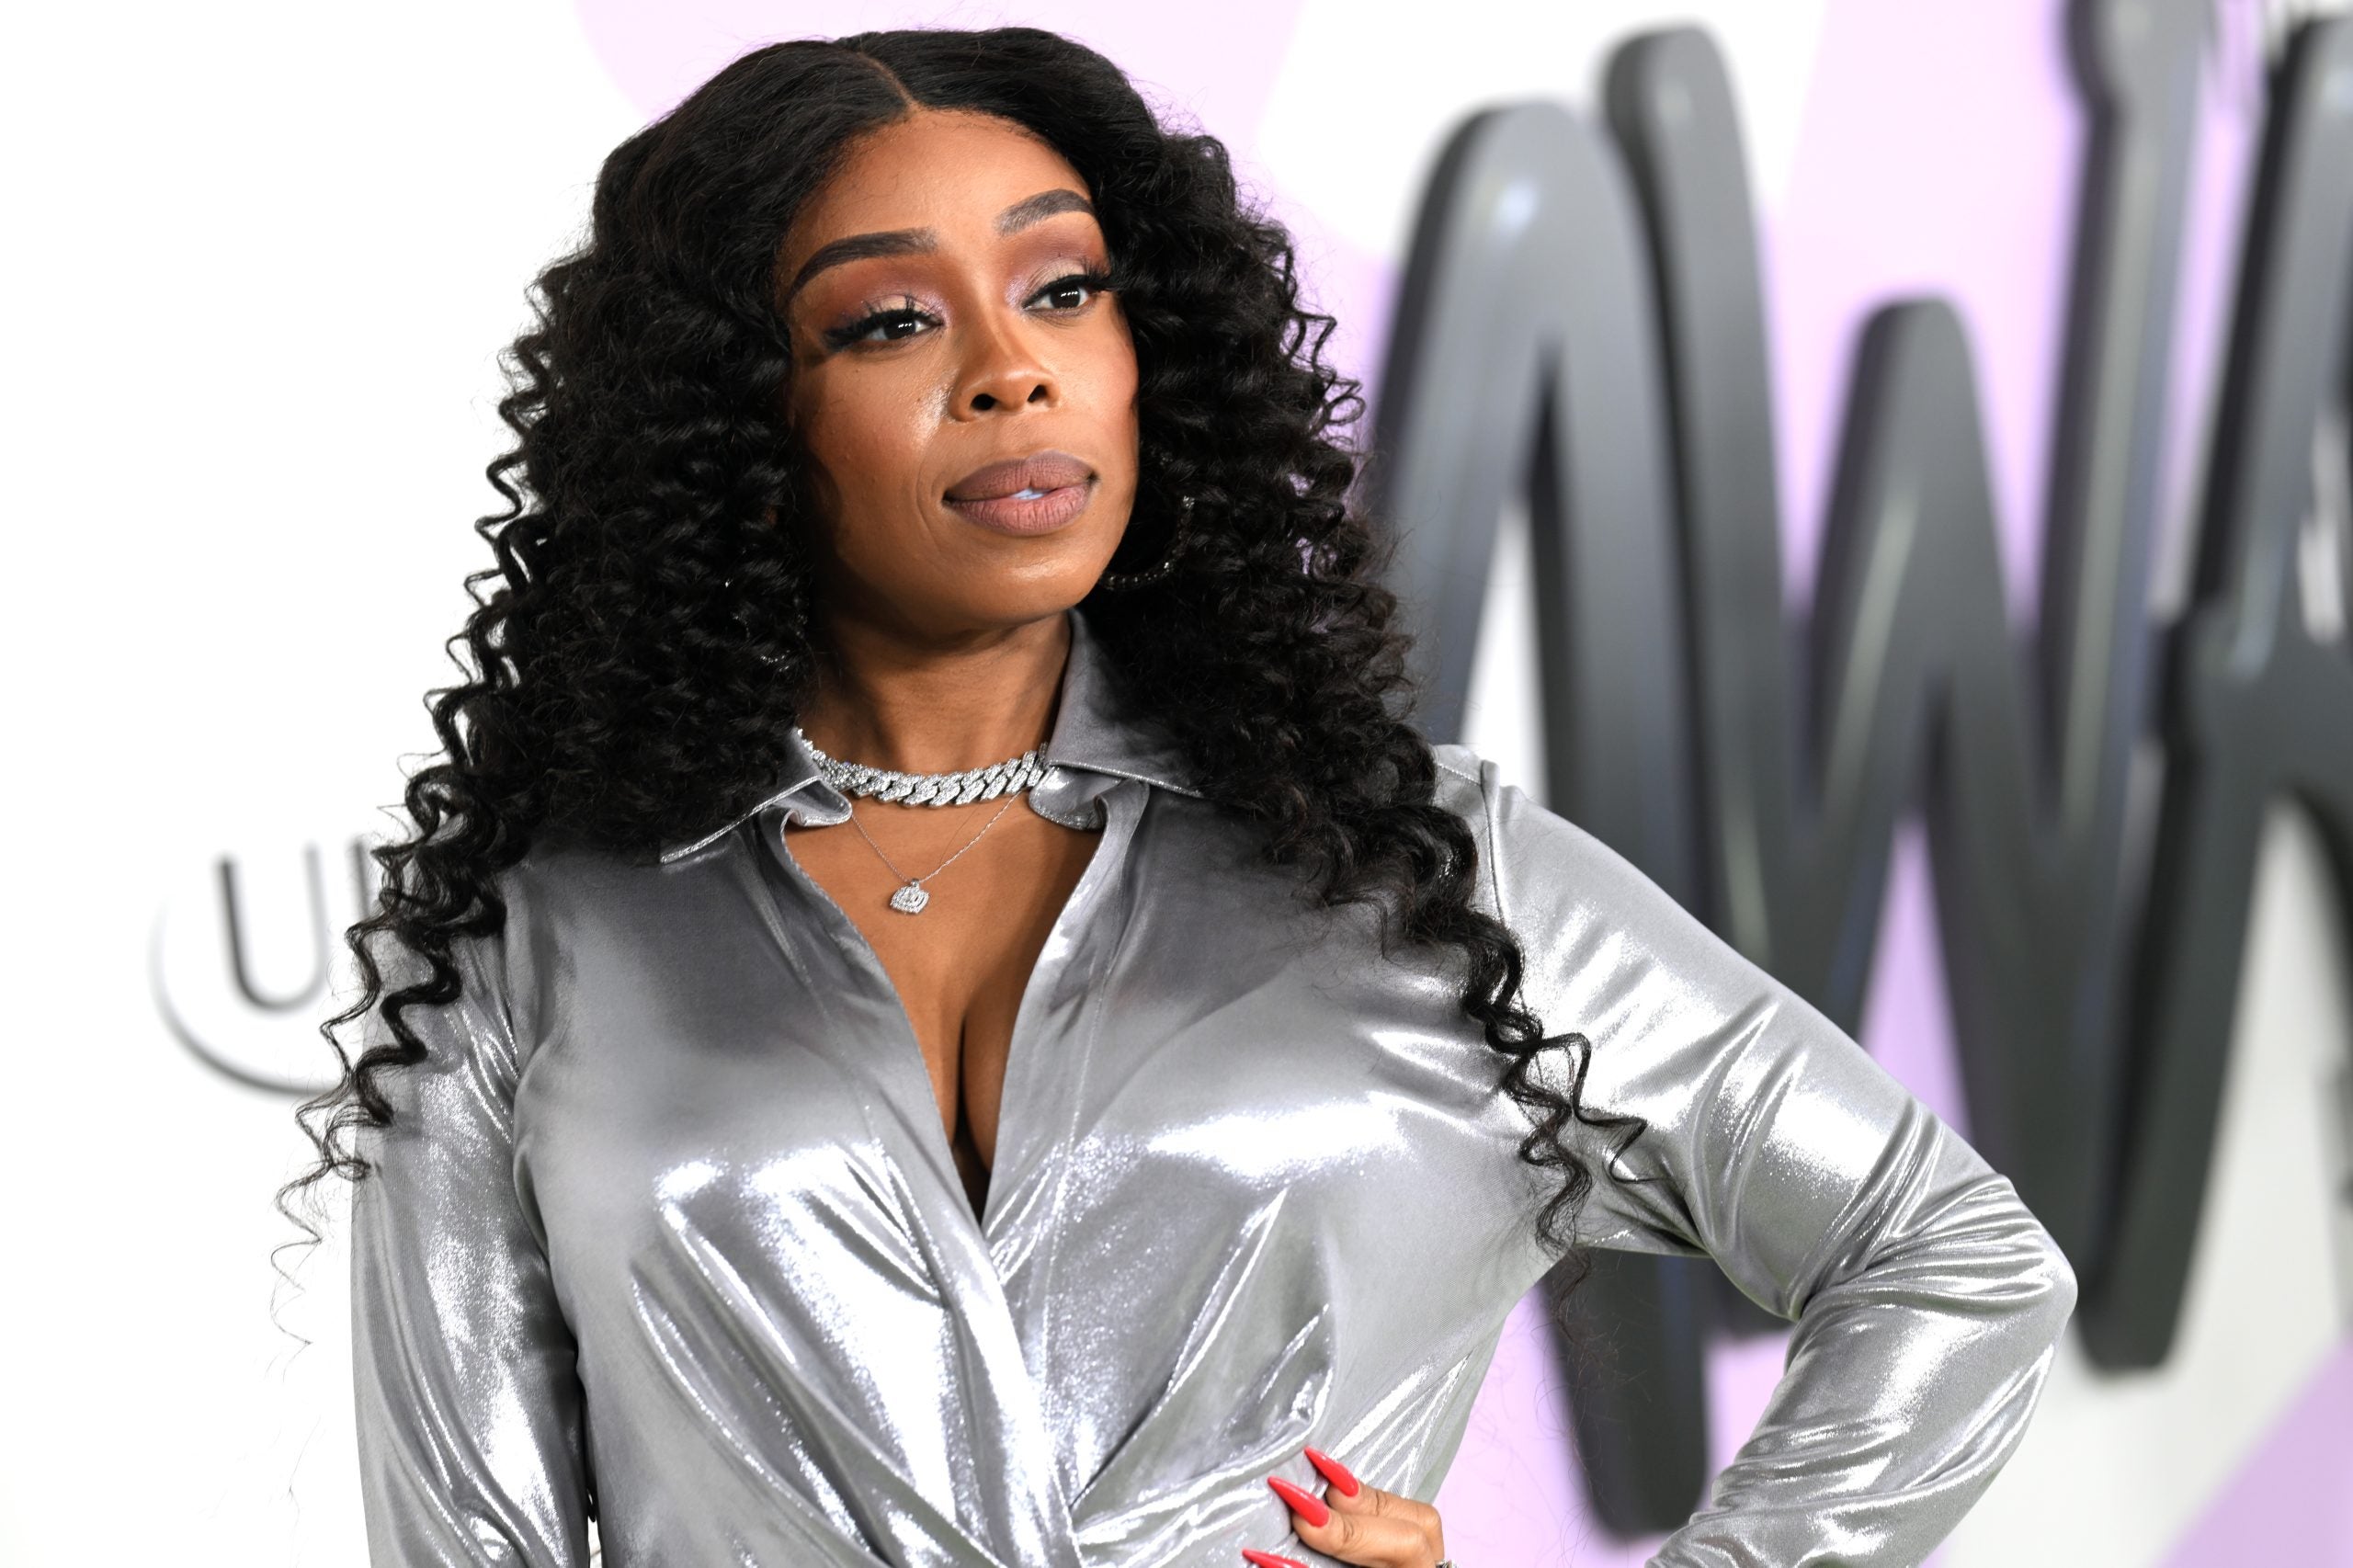 'Love And Hip Hop' Star Shay Johnson Suffers A Miscarriage: ‘This Process Was Hard’